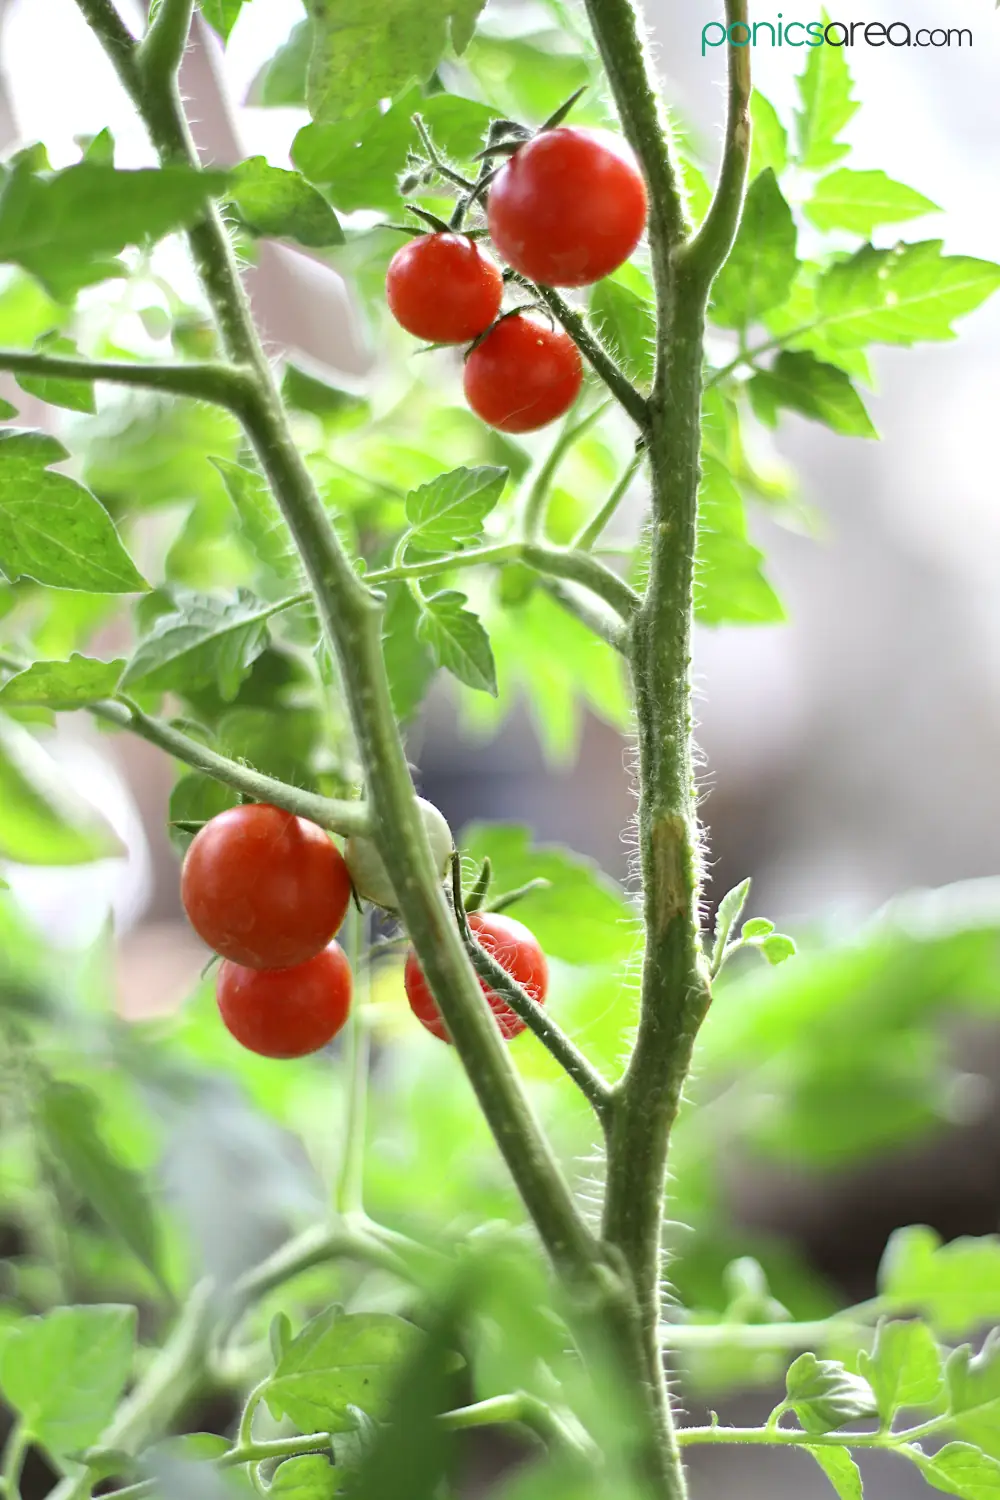 growing hydroponic tomatoes